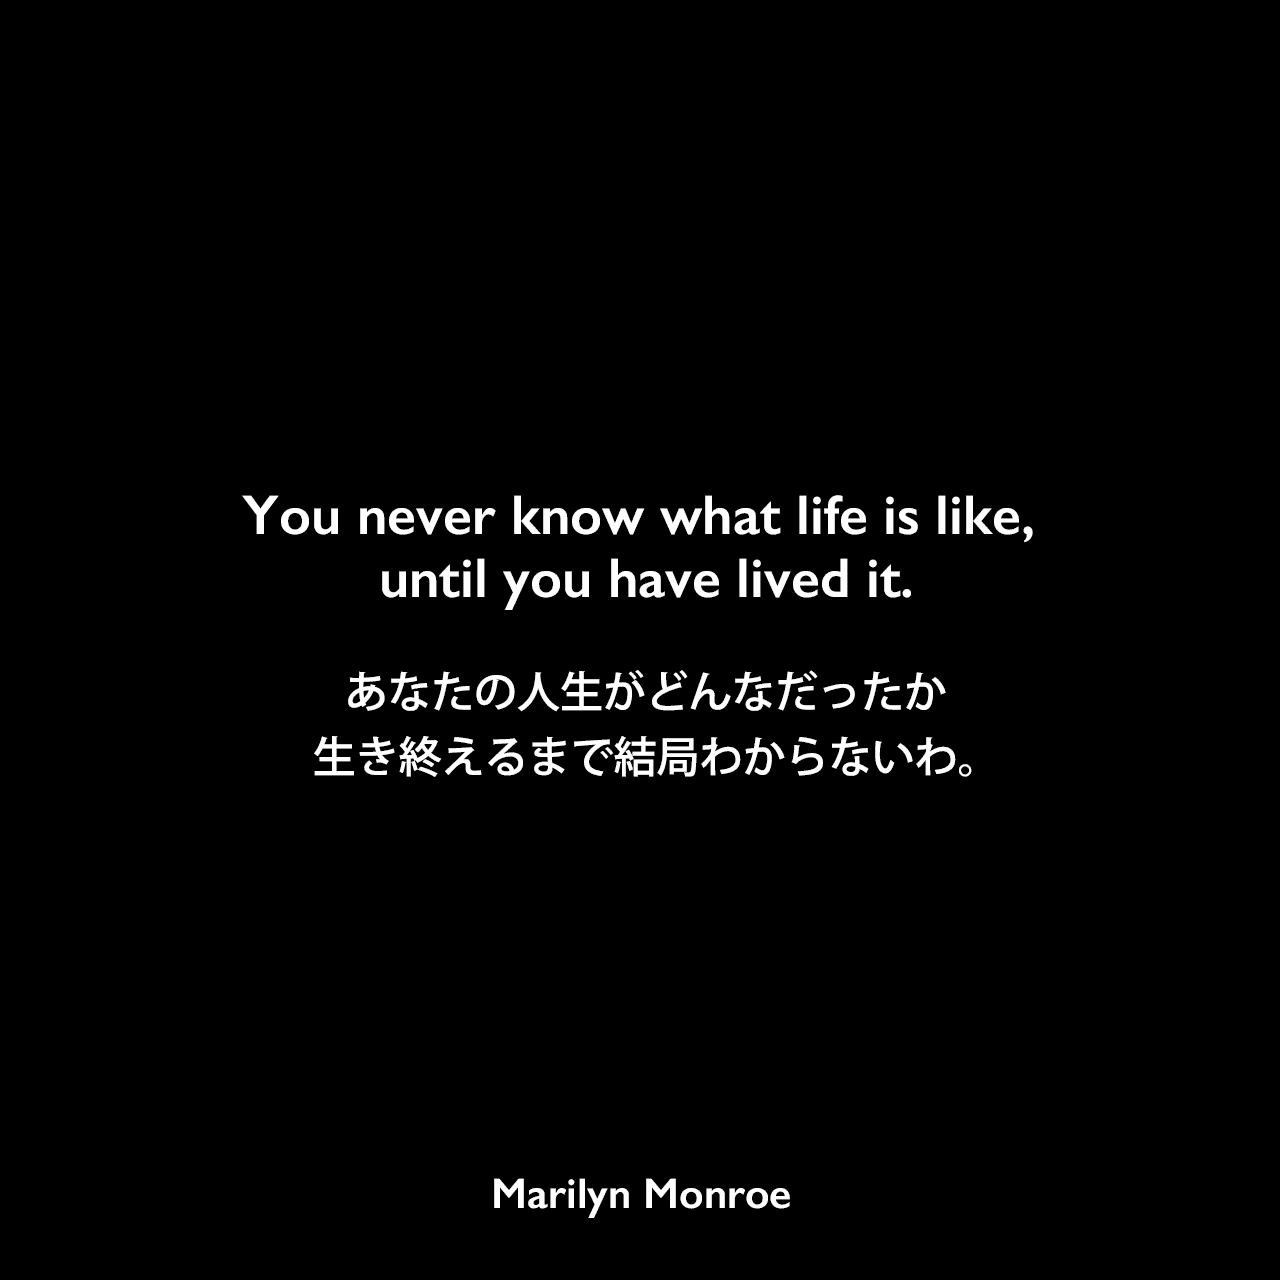 You never know what life is like, until you have lived it.あなたの人生がどんなだったか、生き終えるまで結局わからないわ。Marilyn Monroe